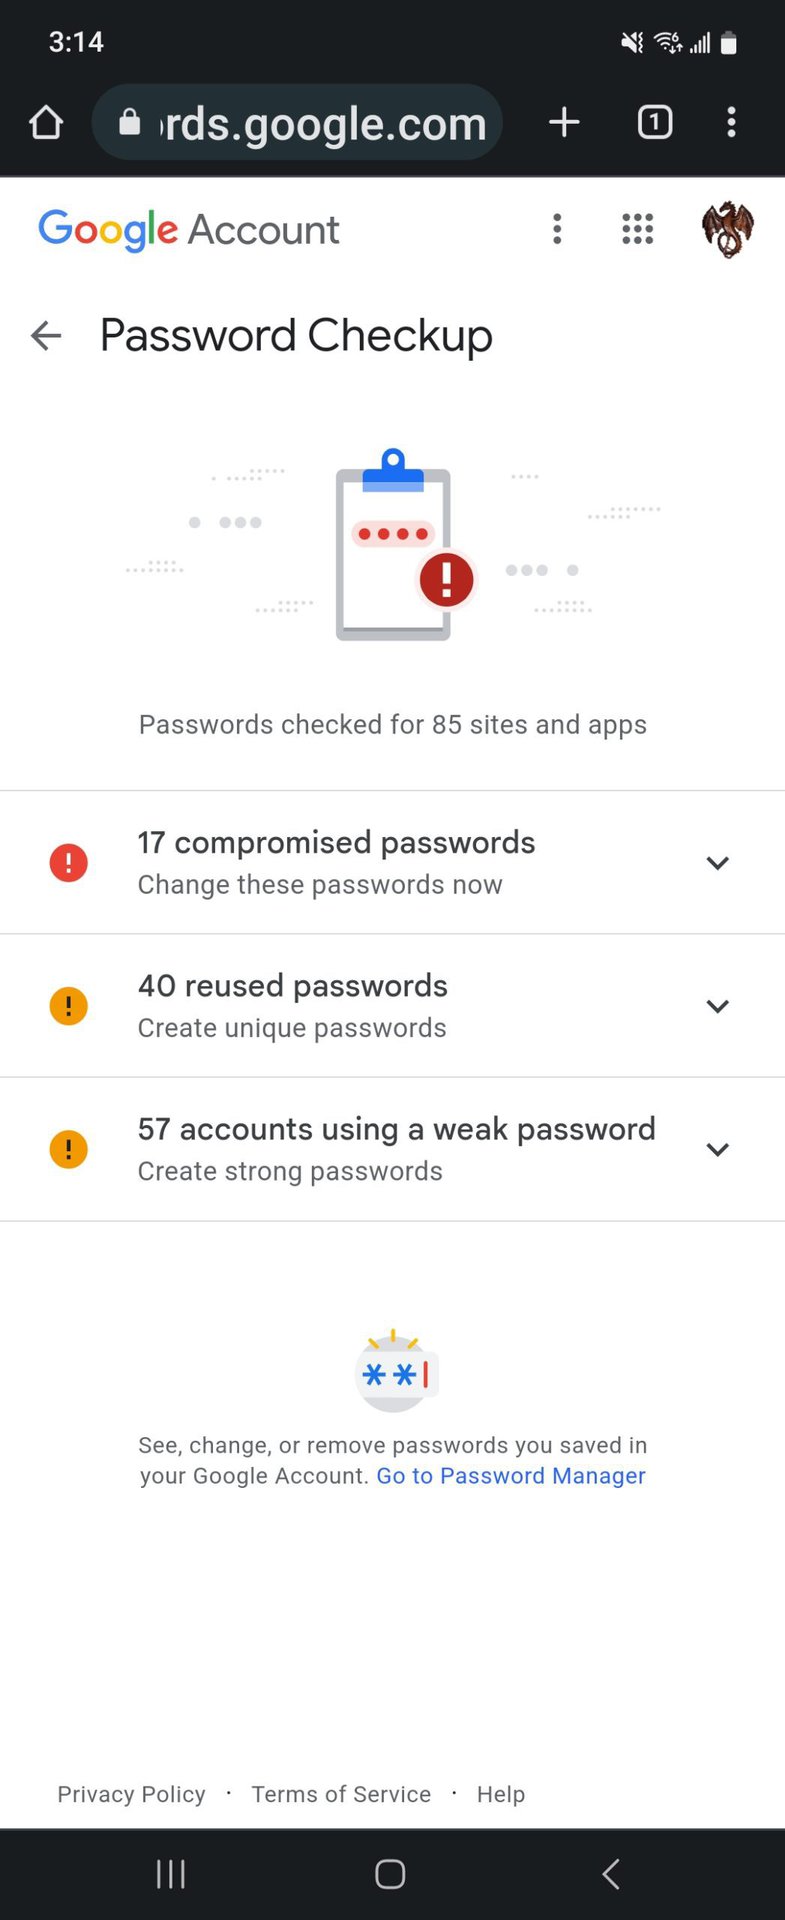 Saved Passwords Password Checkup Results